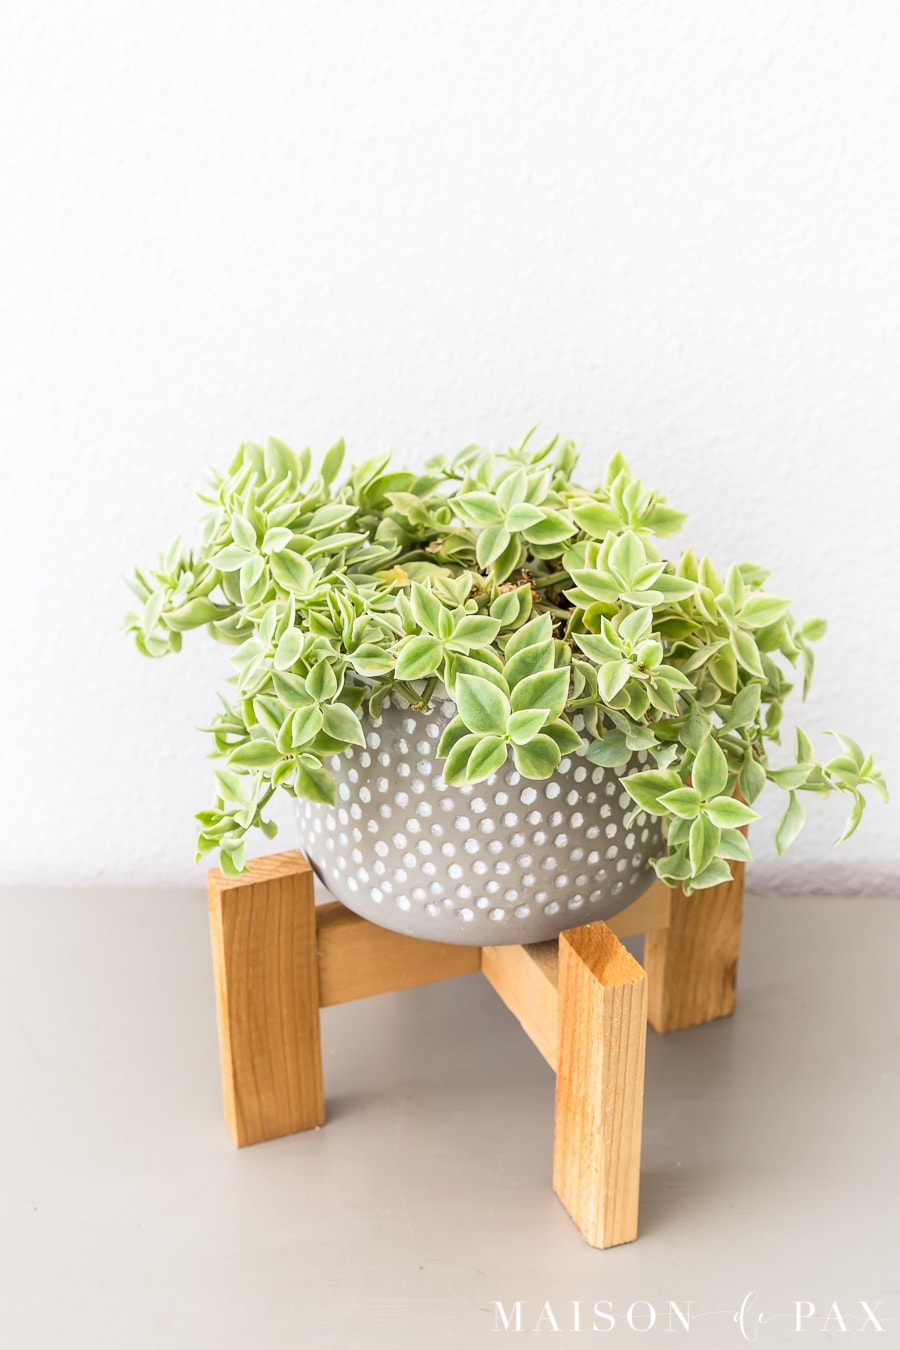 15 Magnificent DIY Plant Stand Projects You Must Attempt